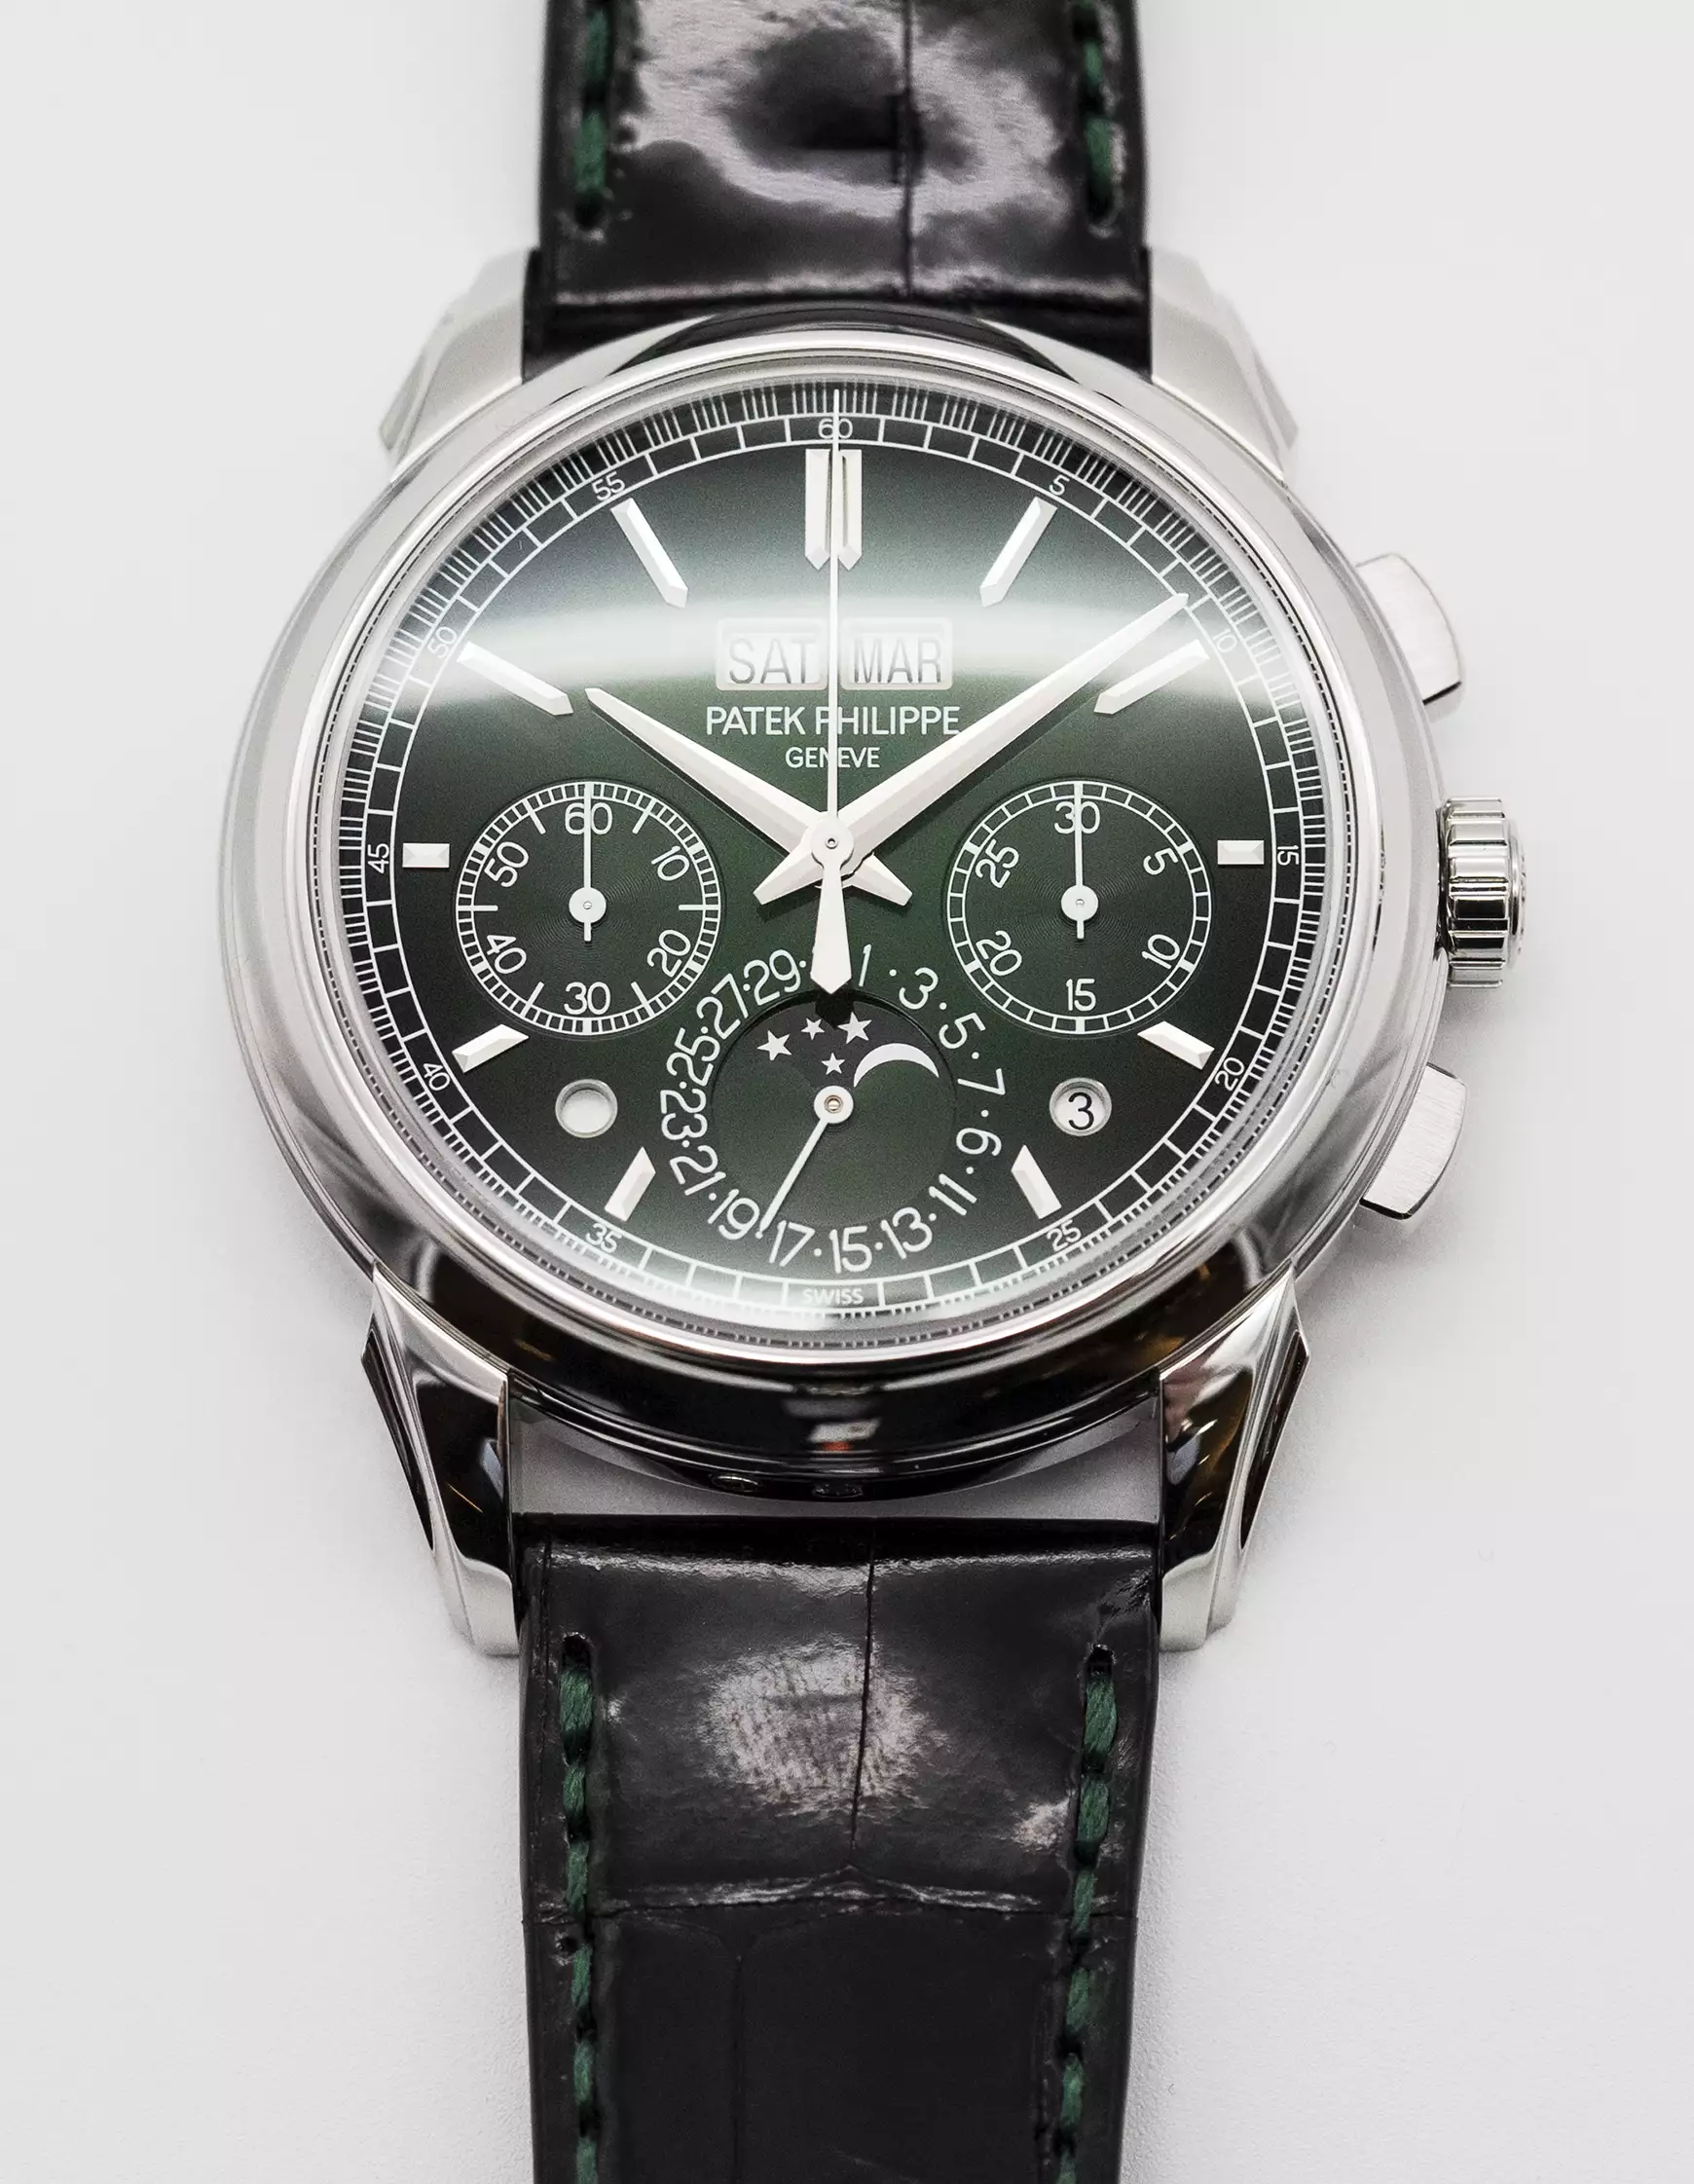 [VIDEO] Patek Philippe Embraces ?Vintage Style? Look With 4 New References